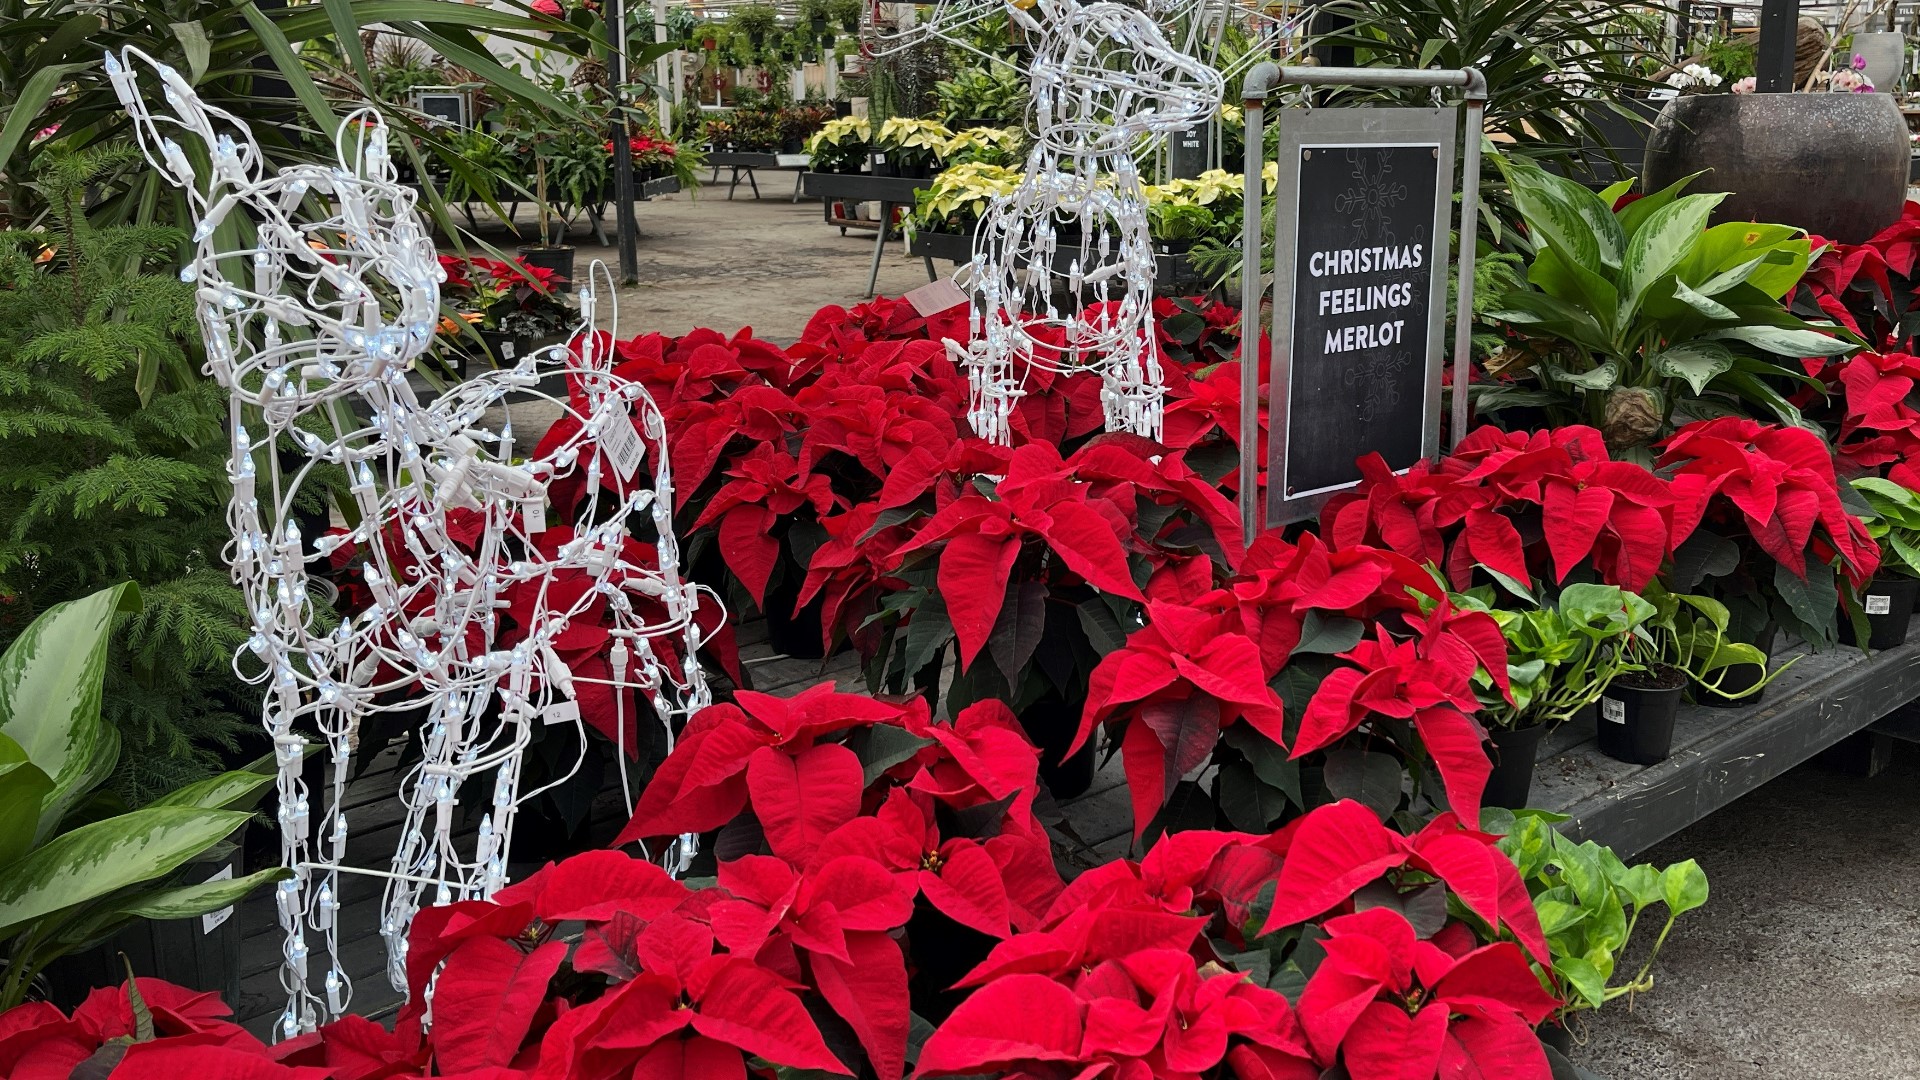 The garden and home center has gifts for everyone on your list. Sponsored by Molbak's.